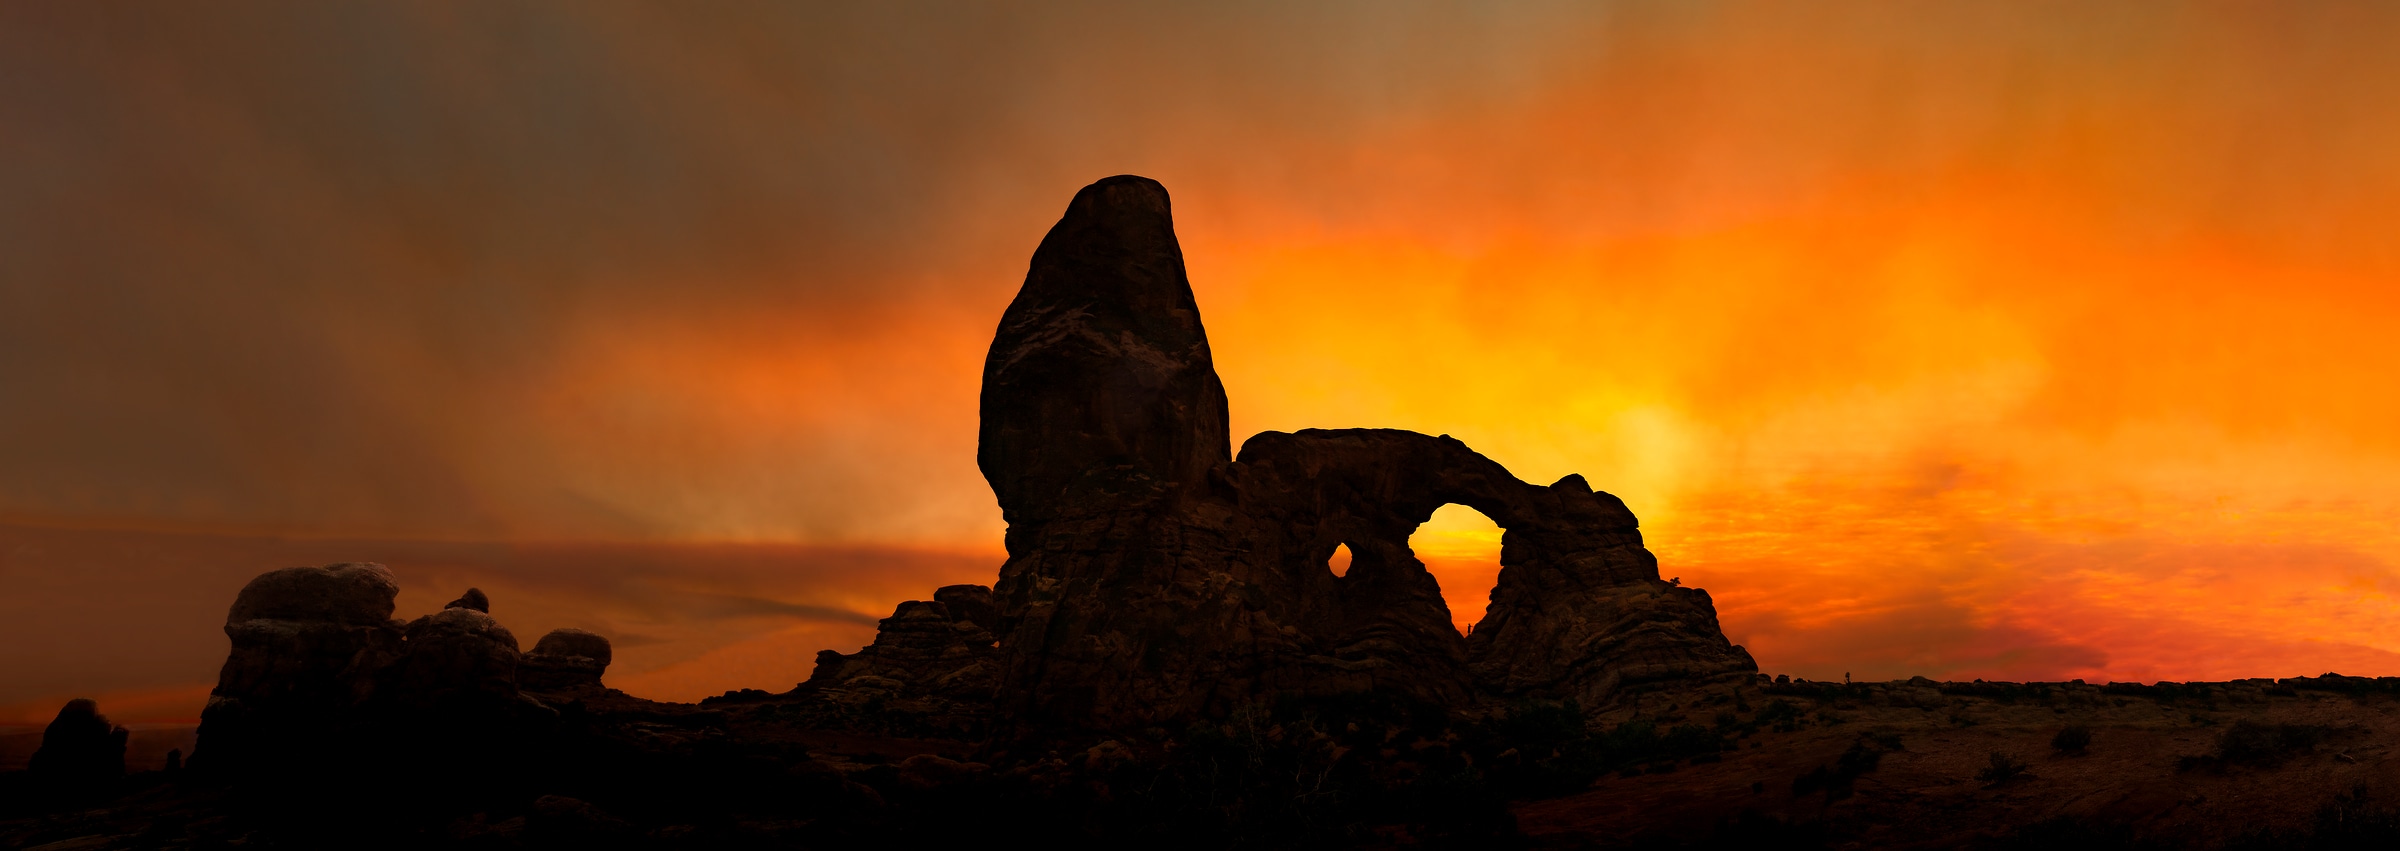 276 megapixels! A very high resolution, large-format VAST photo print of rock formations at sunset in Arches National Park; landscape photograph created by David David in Utah.